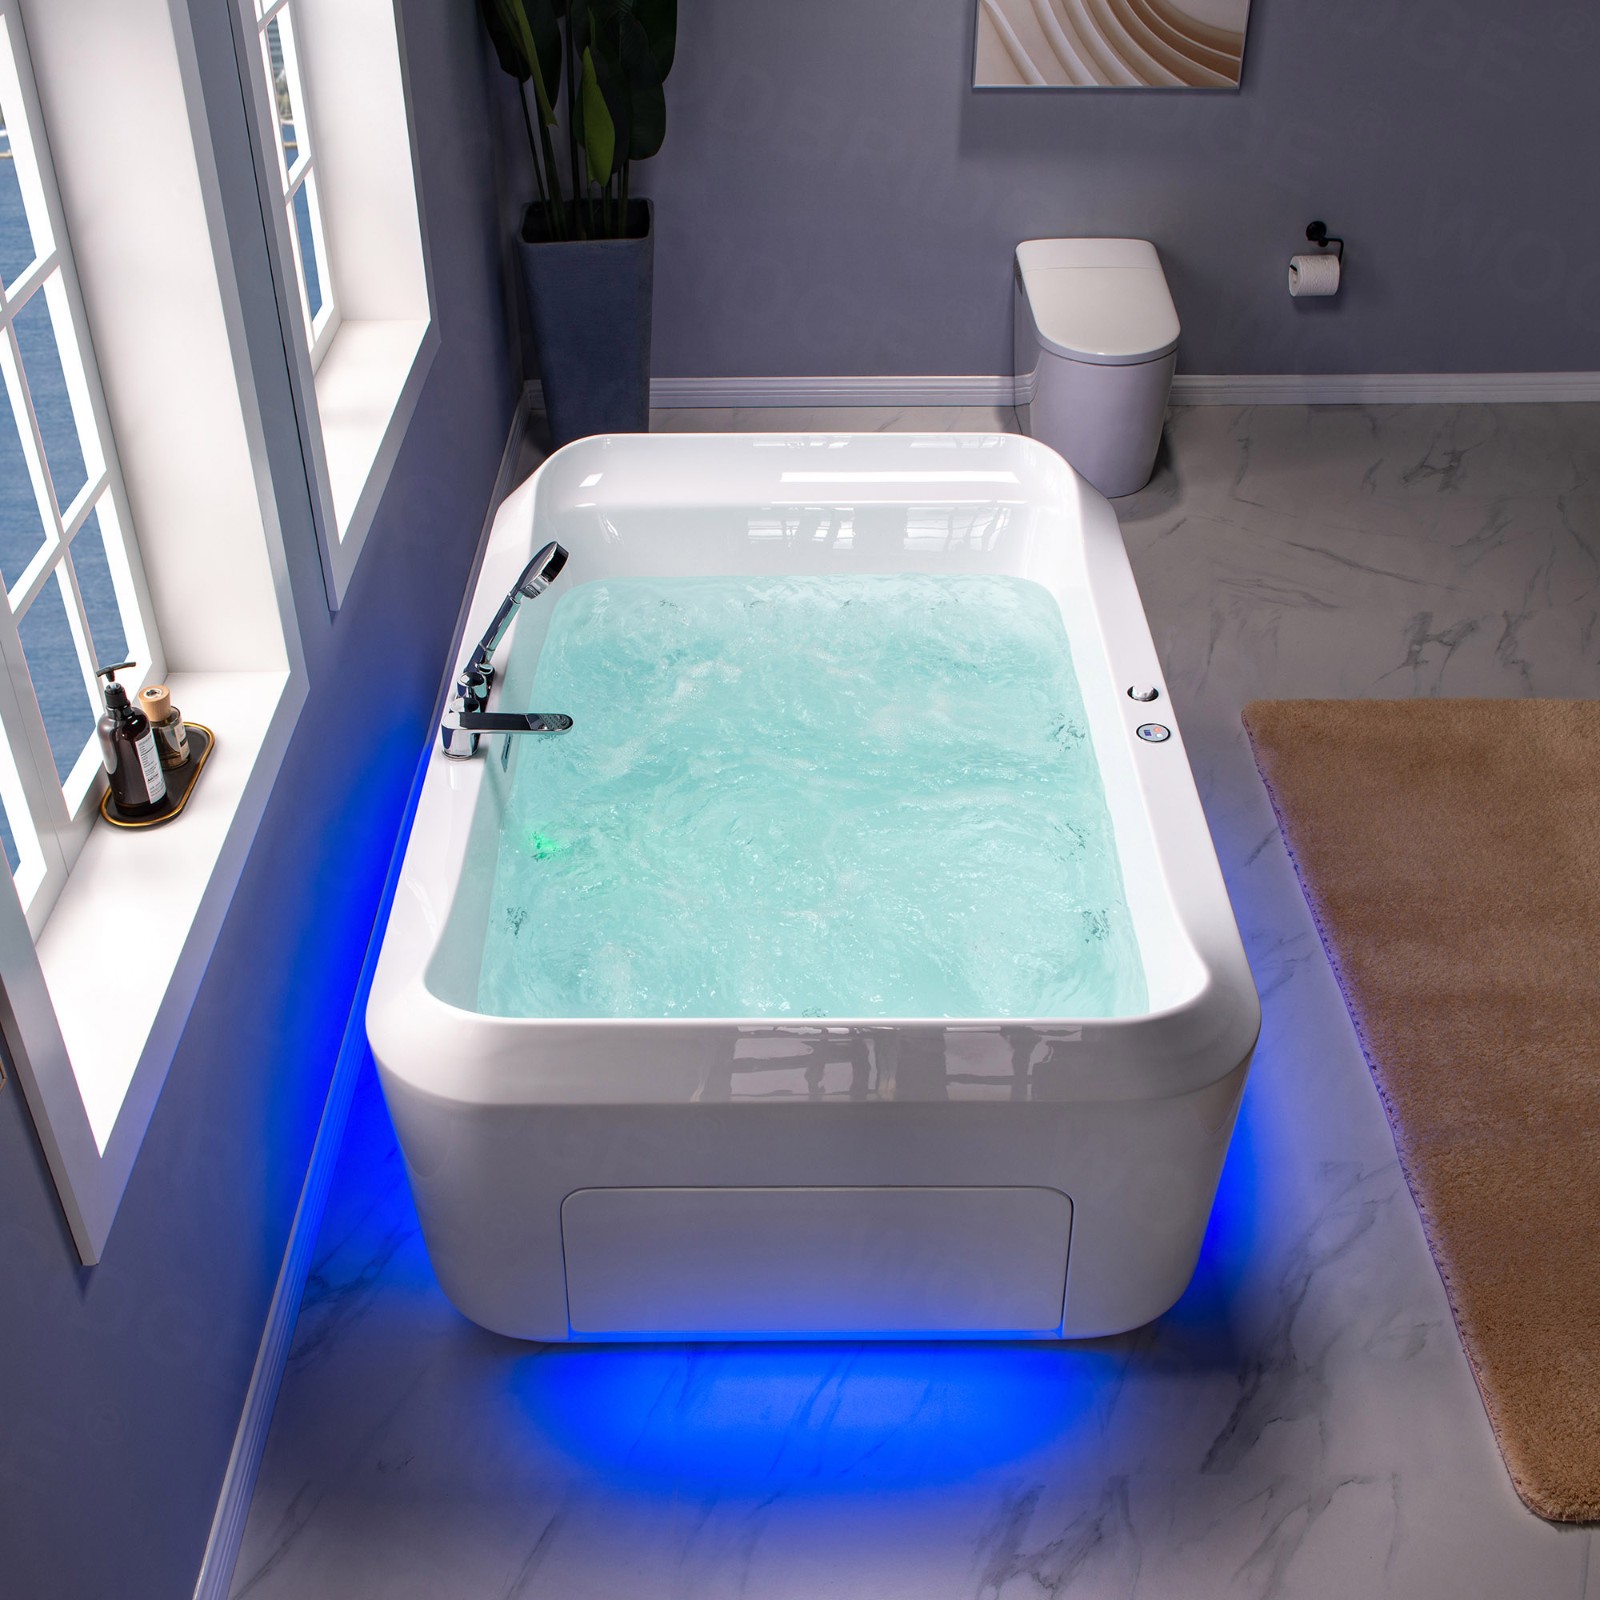  2 Person Freestanding Massage Hydrotherapy Bathtub Tub Hot Tub Spa, with Inline Heater. BTS-0091_9097